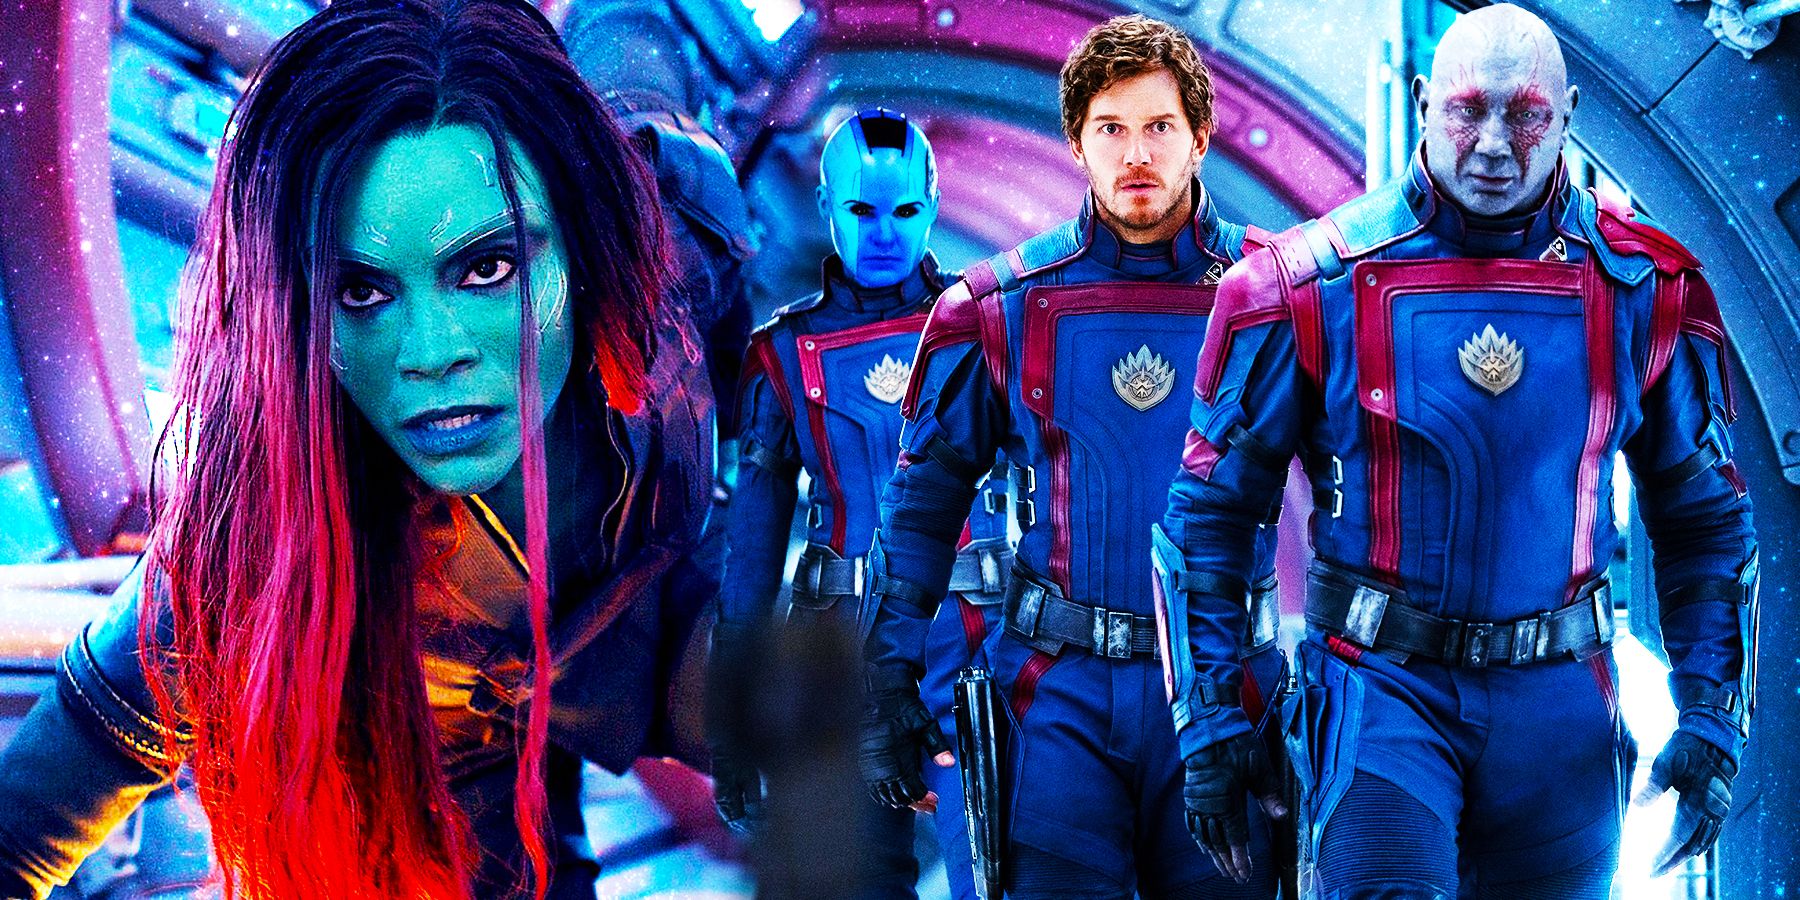 Guardians of the Galaxy Vol. 3' is one of the greatest Marvel movies 